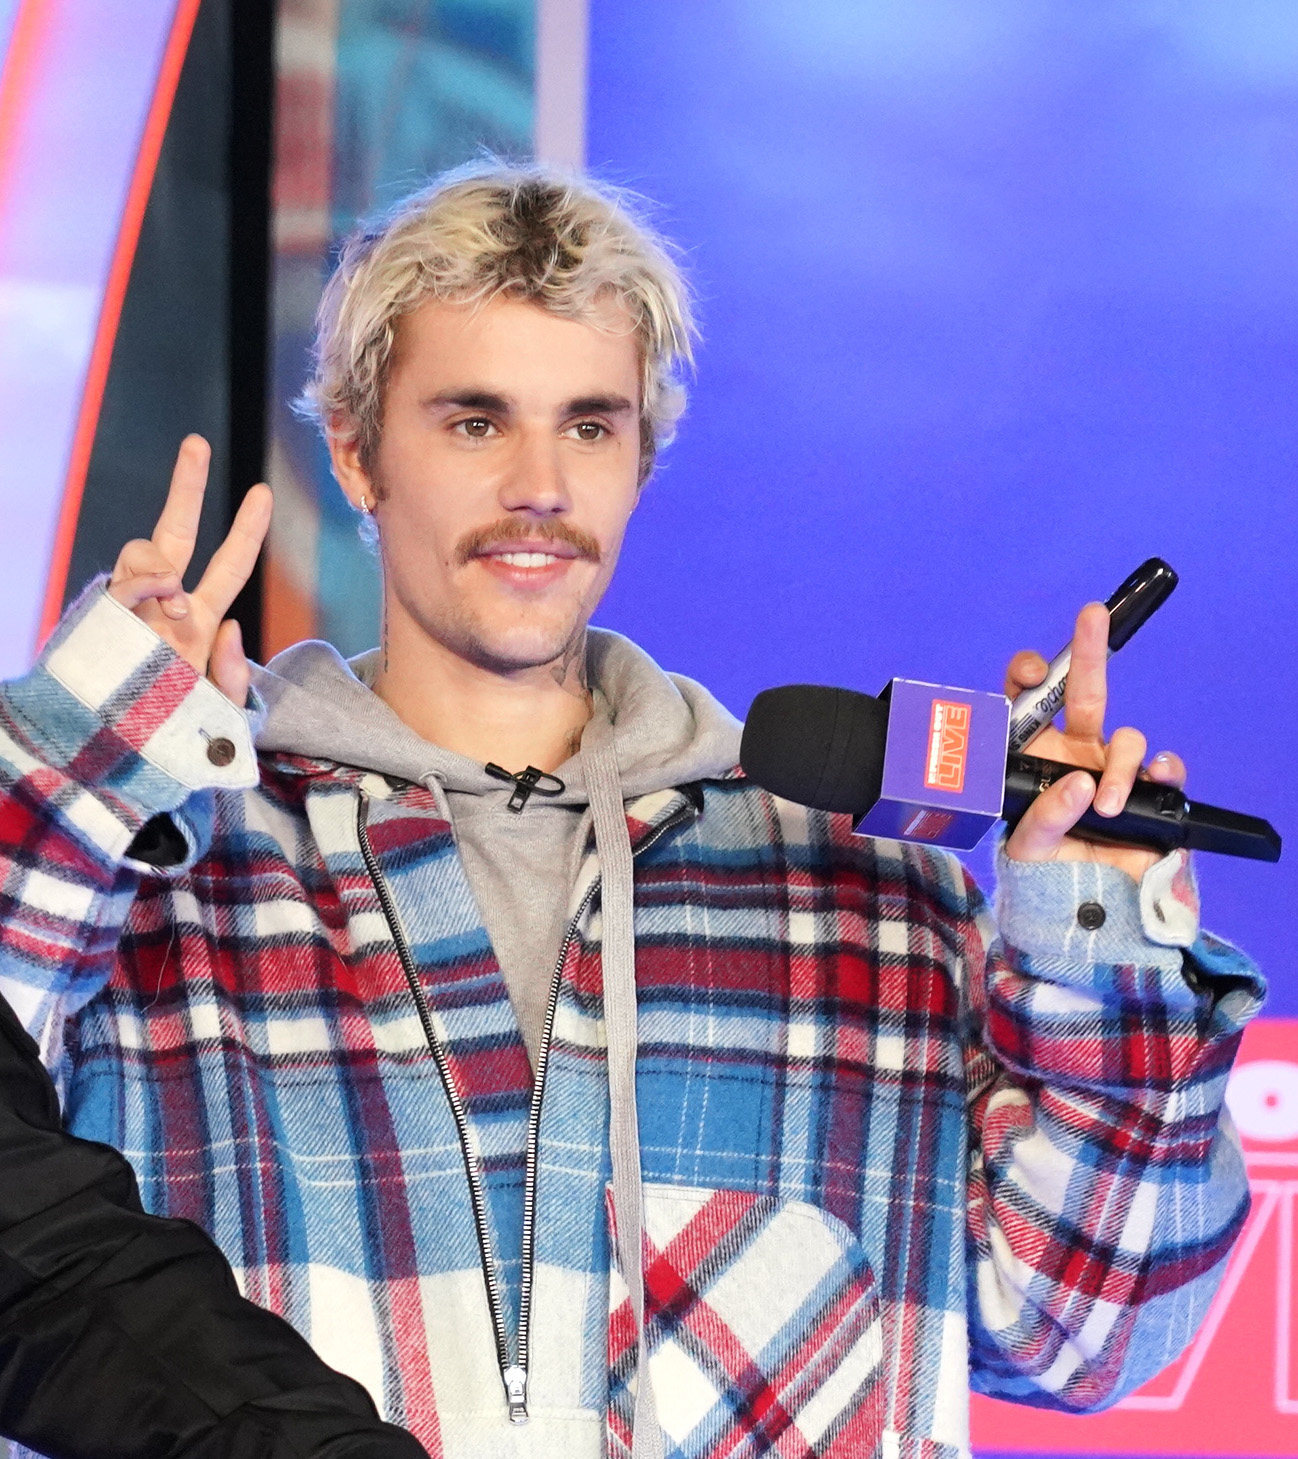 Justin Bieber owns two NFTs from the Bored Ape collection, while Gwyneth Paltrow and Eminem also own one each. Photo: Cindy Ord/Getty Images for MTV/TNS